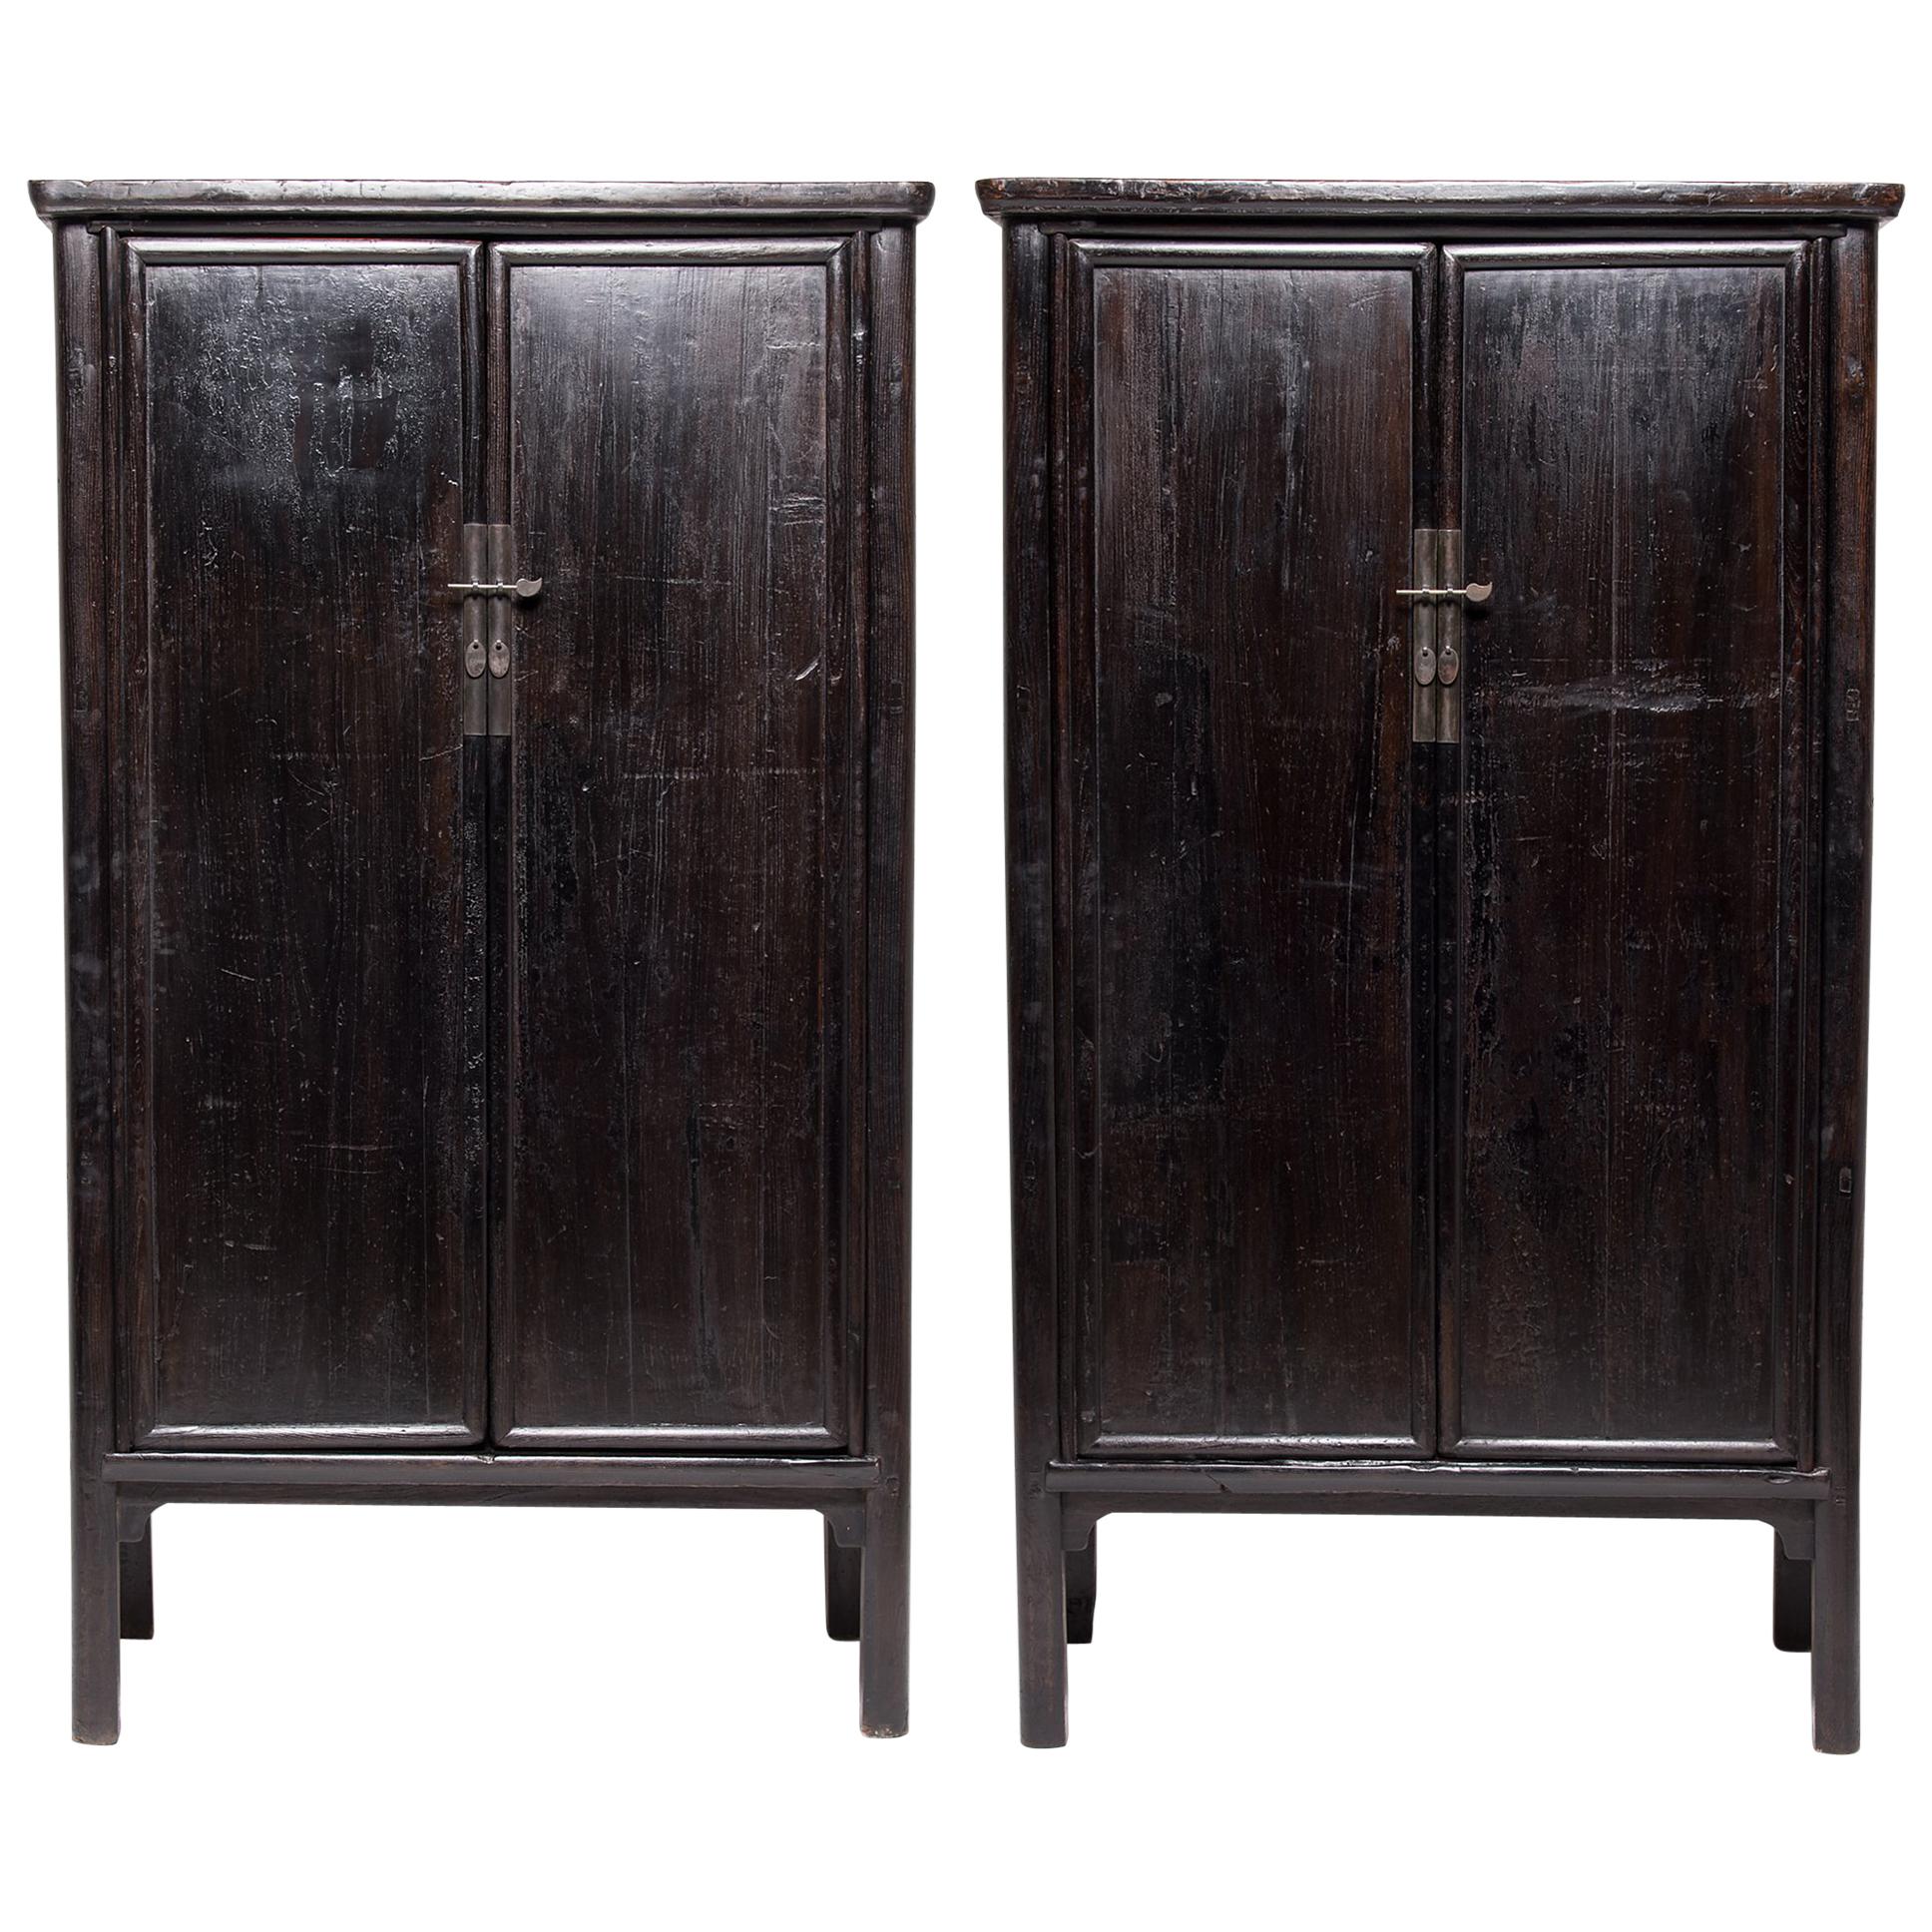 Pair of Chinese Black Lacquer Noodle Cabinets, c. 1850